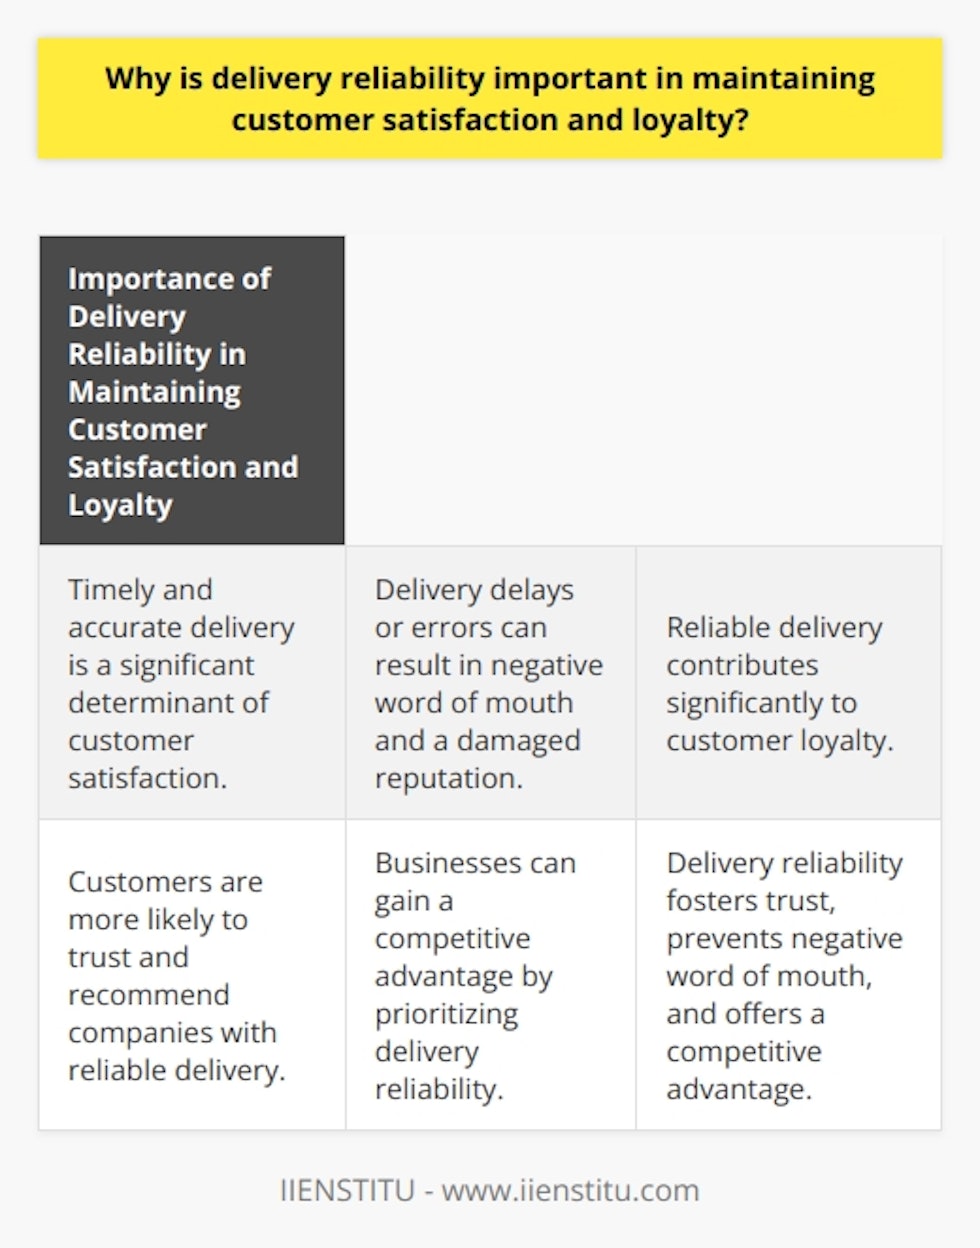 Delivery reliability is a critical factor in maintaining customer satisfaction and loyalty, particularly in today's competitive market. Customers have high expectations for receiving their orders on time and in good condition, making dependability a crucial aspect of choosing a service provider or retailer.Timely and accurate delivery is a significant determinant of customer satisfaction. When customers receive their goods on time, as promised, it leads to a greater sense of satisfaction with the overall experience. This builds trust and confidence in the company, increasing the likelihood of repeat business.On the other hand, delivery delays or errors can result in negative word of mouth and a damaged reputation. Customers who experience unreliable deliveries may share their frustrations with others, whether it be friends, family, or on social media platforms. This can dissuade potential customers from using the same service or business. Therefore, maintaining delivery consistency is crucial to avoid such backlash.Reliable delivery also contributes significantly to customer loyalty. By consistently meeting or exceeding customers' expectations, companies foster a sense of trust and dependability. This creates a long-lasting bond, encouraging customers to return repeatedly and recommend the brand to others. Ultimately, a company's ability to ensure reliable delivery directly influences customer loyalty and its bottom line.Additionally, businesses can gain a competitive advantage by prioritizing delivery reliability. In a crowded marketplace, companies need to differentiate themselves to attract and retain customers. By focusing on ensuring reliable delivery, companies can set themselves apart from their competitors and offer a key selling point that customers are sure to appreciate. This focus on exceeding customer expectations often translates into higher customer retention rates and brand advocacies.In conclusion, delivery reliability is crucial for maintaining customer satisfaction and loyalty. Ensuring timely and accurate delivery fosters trust, creates satisfied customers, prevents negative word of mouth, and offers a competitive advantage that benefits both the company and its clientele. By prioritizing delivery reliability, companies position themselves for long-term success and growth.